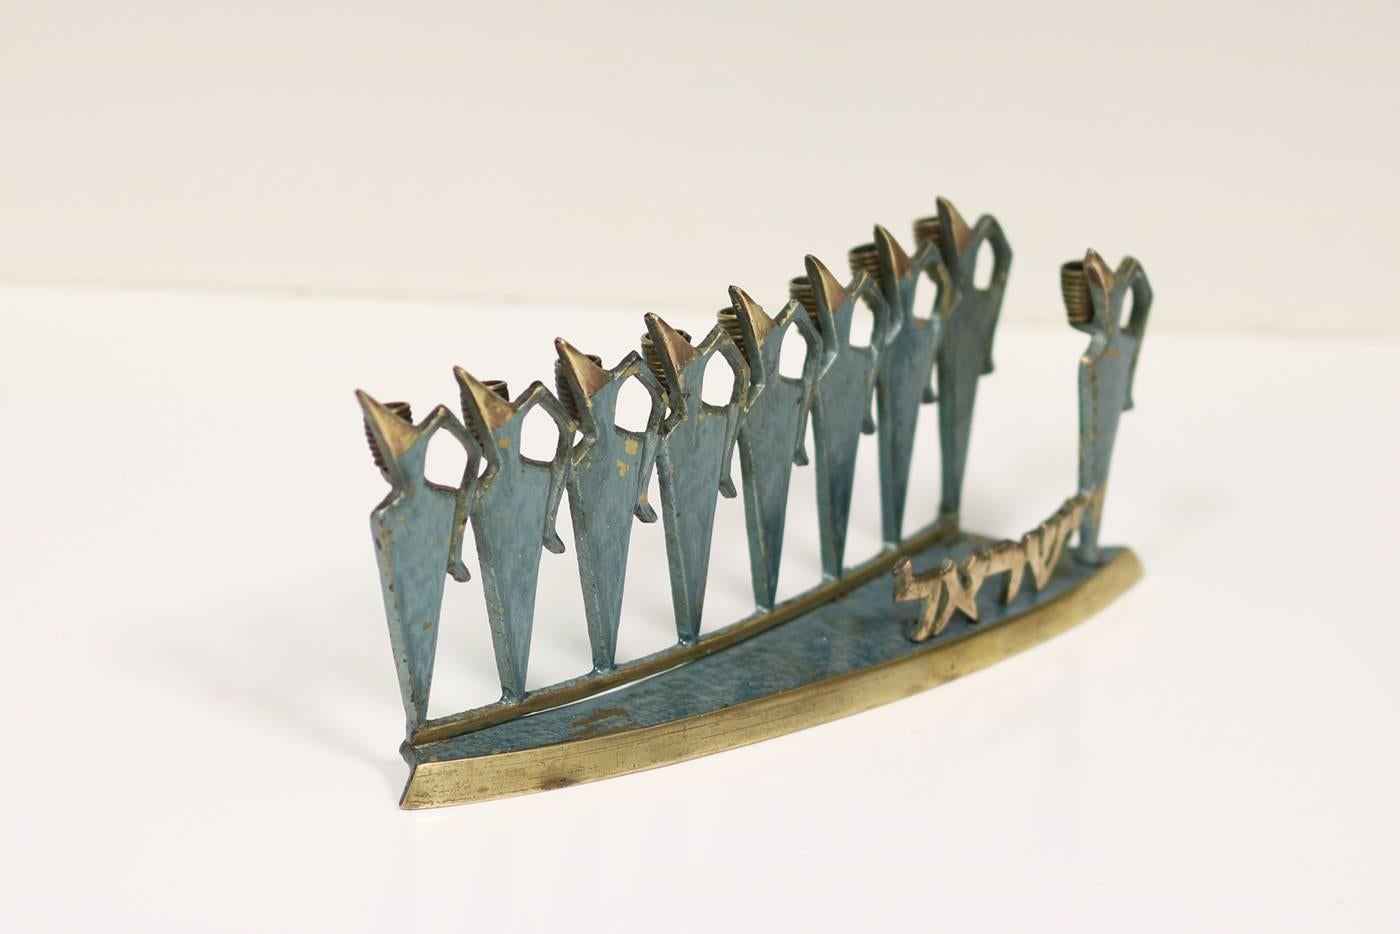 Beautiful 1950s handcrafted metal sculpture, candleholder, brass, made in Israel. Hanukkah Menorah, Judaica. Good, authentic vintage condition.
Insured free shipping worldwide!